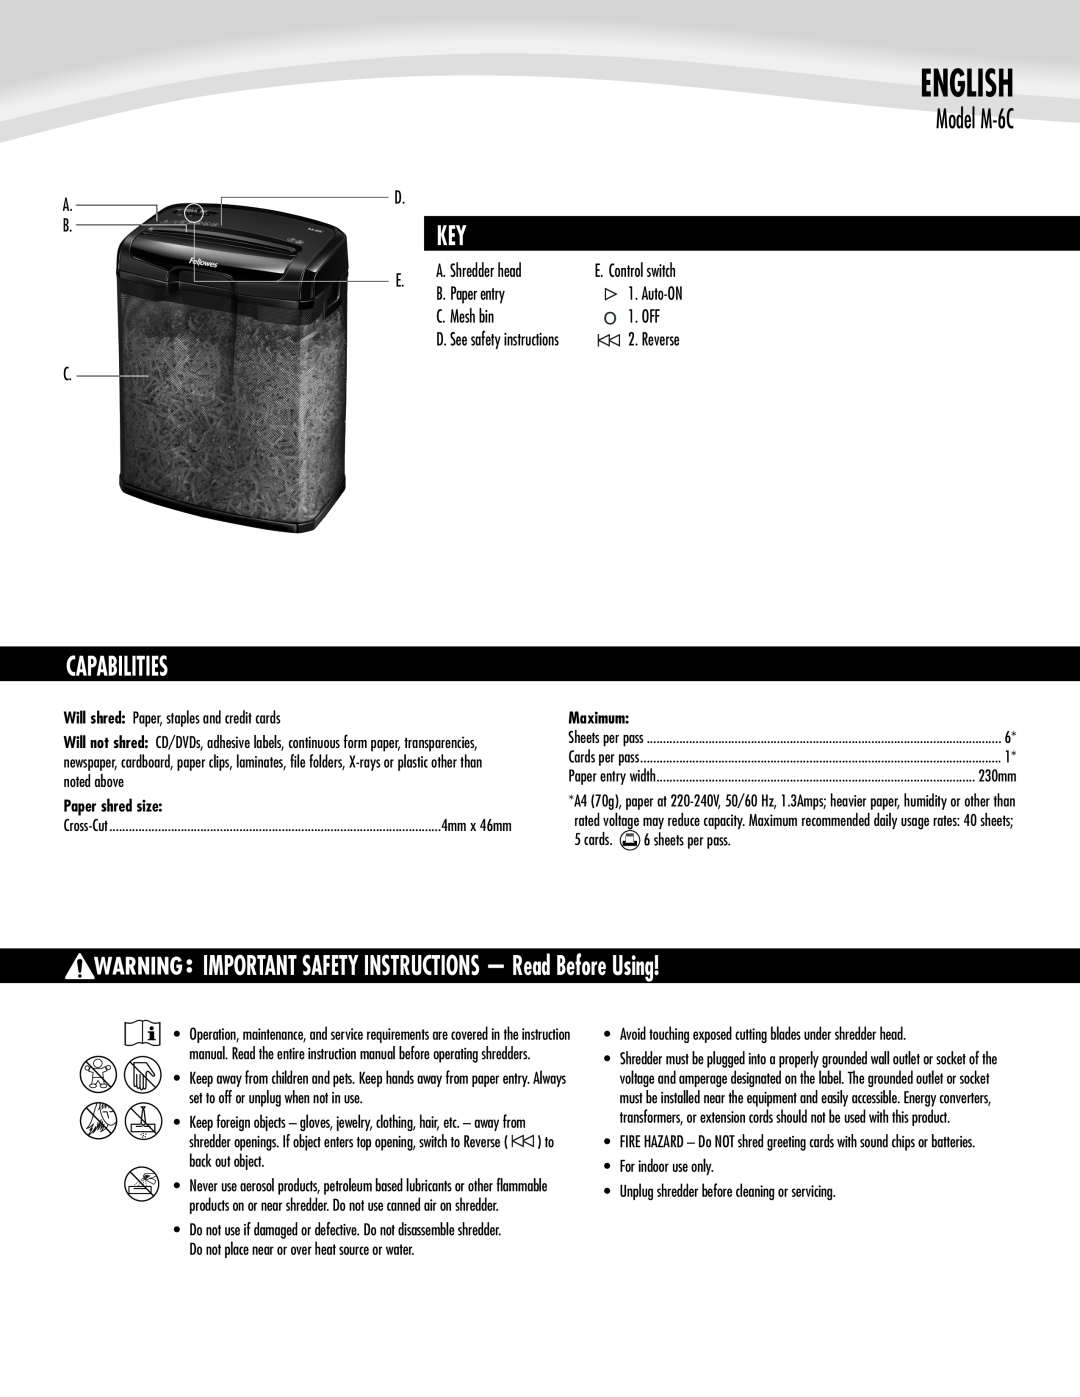 Fellowes Capabilities, IMPORTANT SAFETY INSTRUCTIONS - Read Before Using, English, Model M-6C, A B C, A. Shredder head 